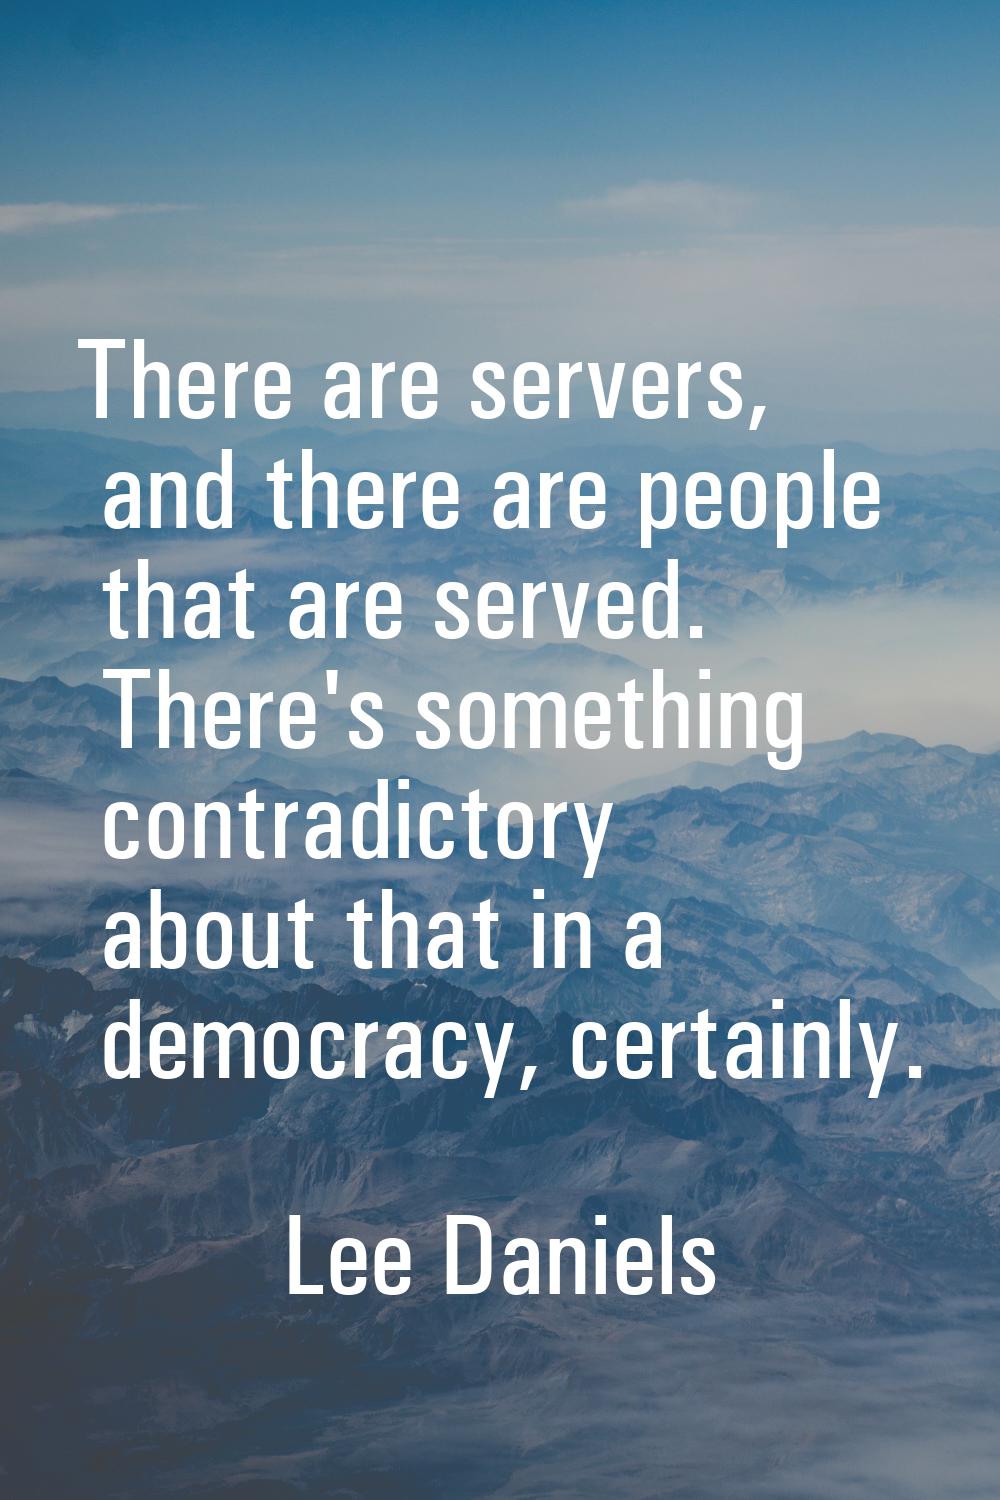 There are servers, and there are people that are served. There's something contradictory about that